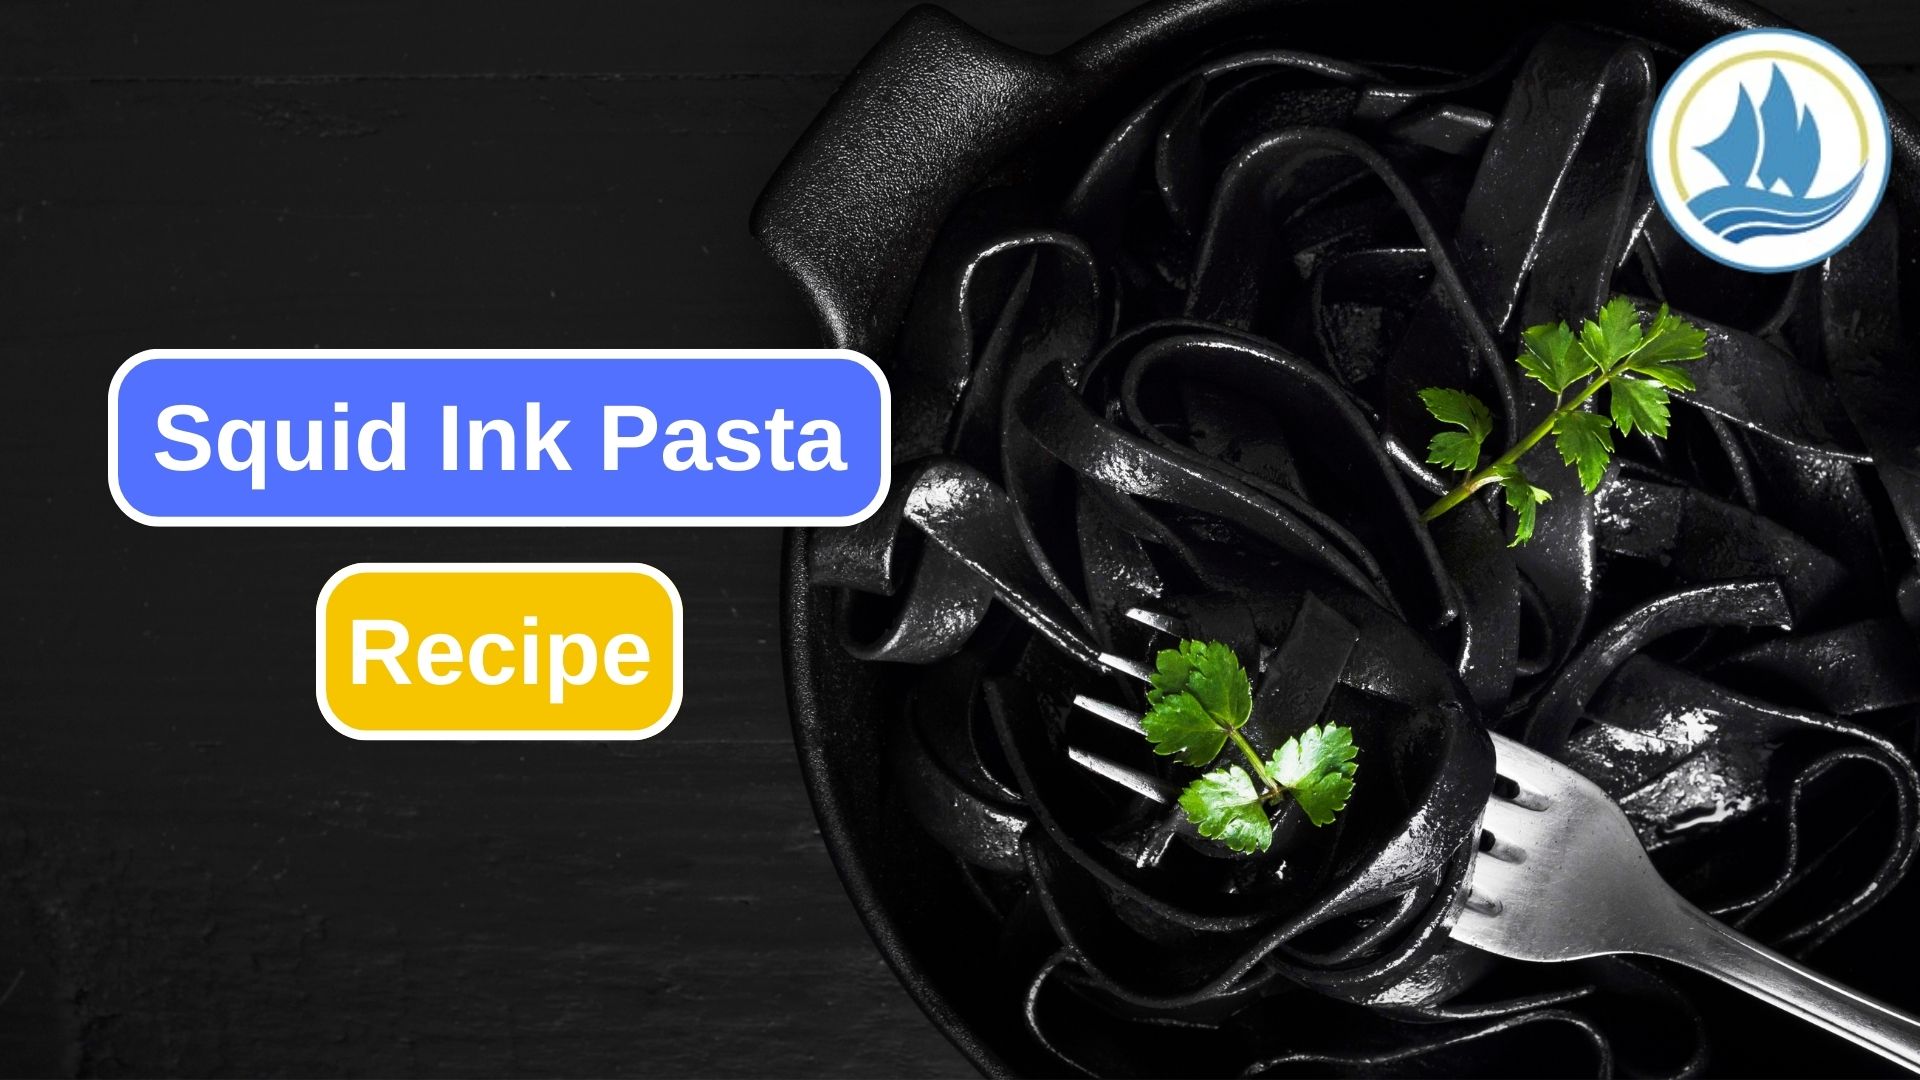 Crafting Squid Ink Pasta in Your Own Kitchen